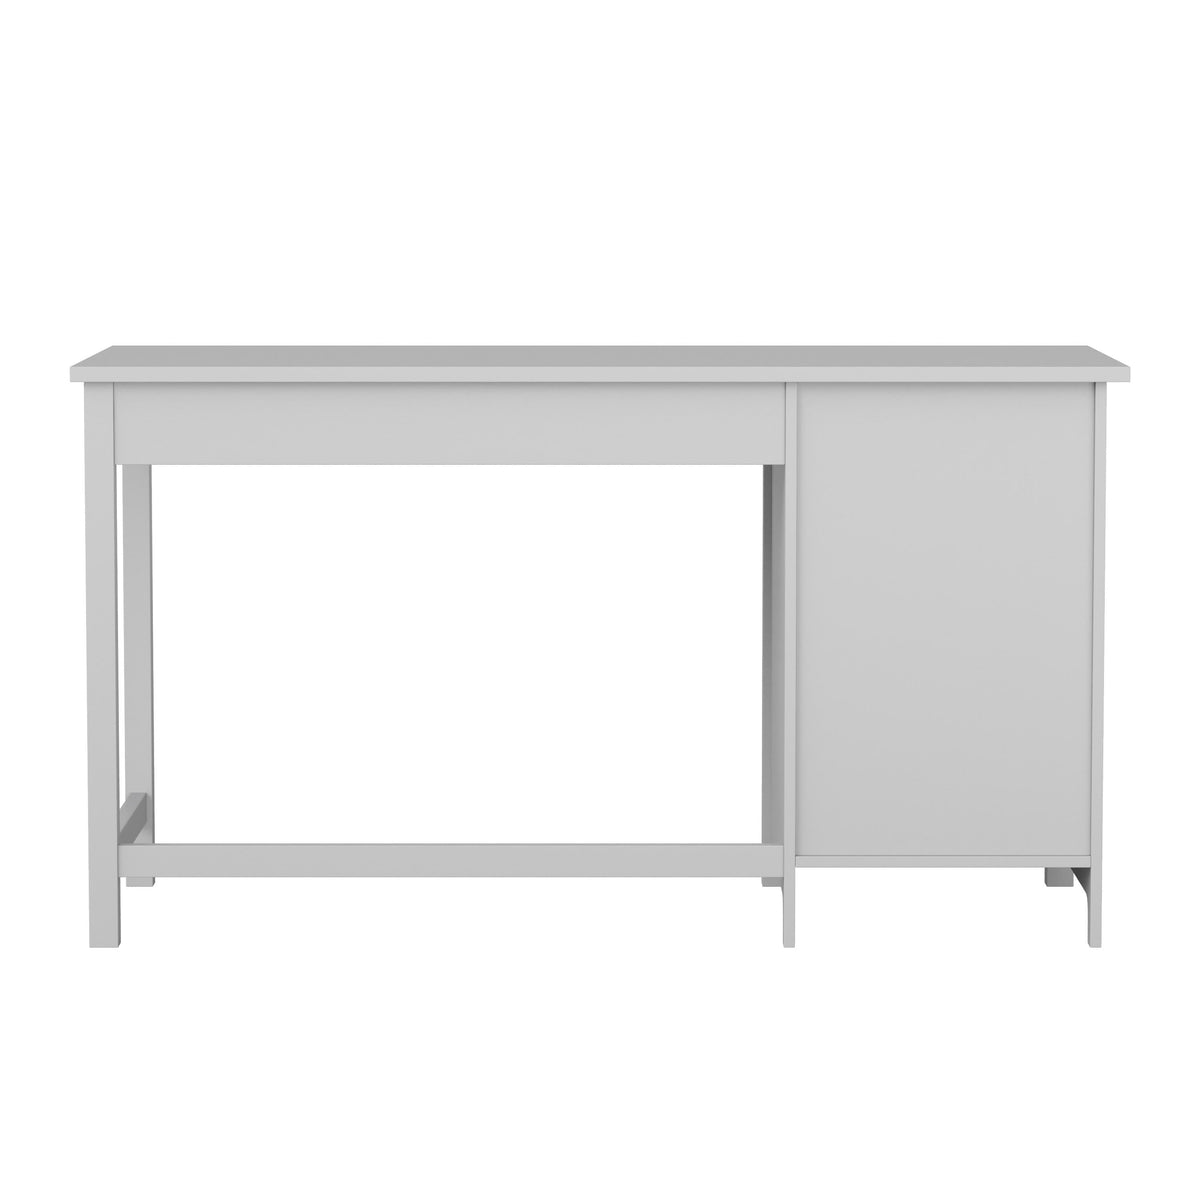 Gray Frame/Brushed Nickel Hardware |#| Gray Shaker Style Home Office Desk with Storage and Brushed Nickel Hardware